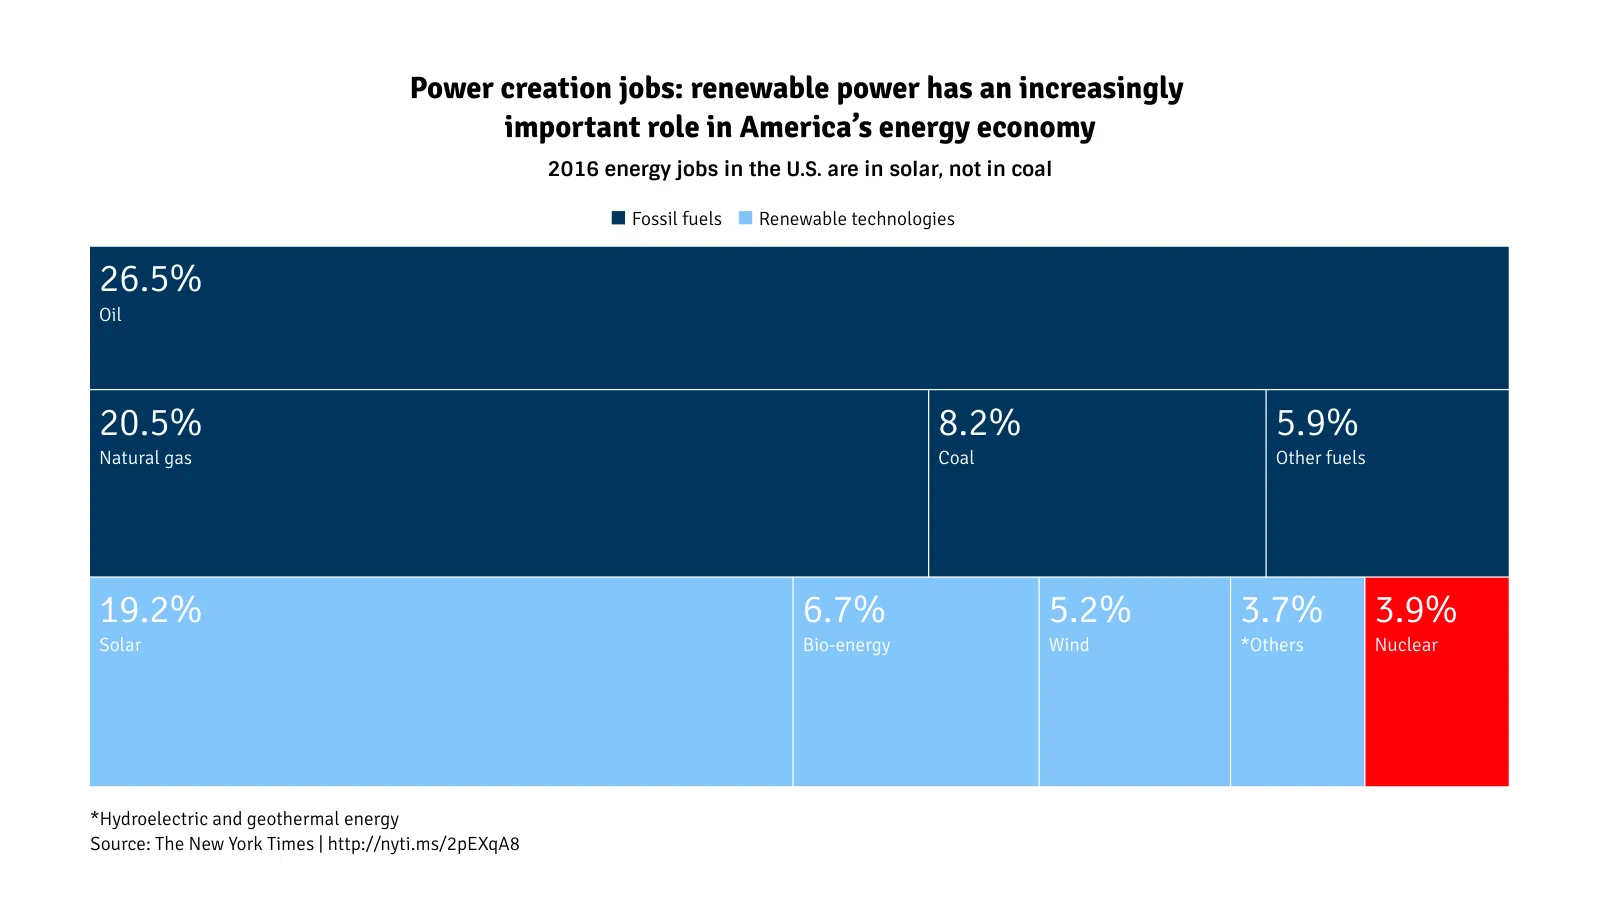 Treemap example: Power creation jobs: renewable power has an increasingly 
important role in America’s energy economy